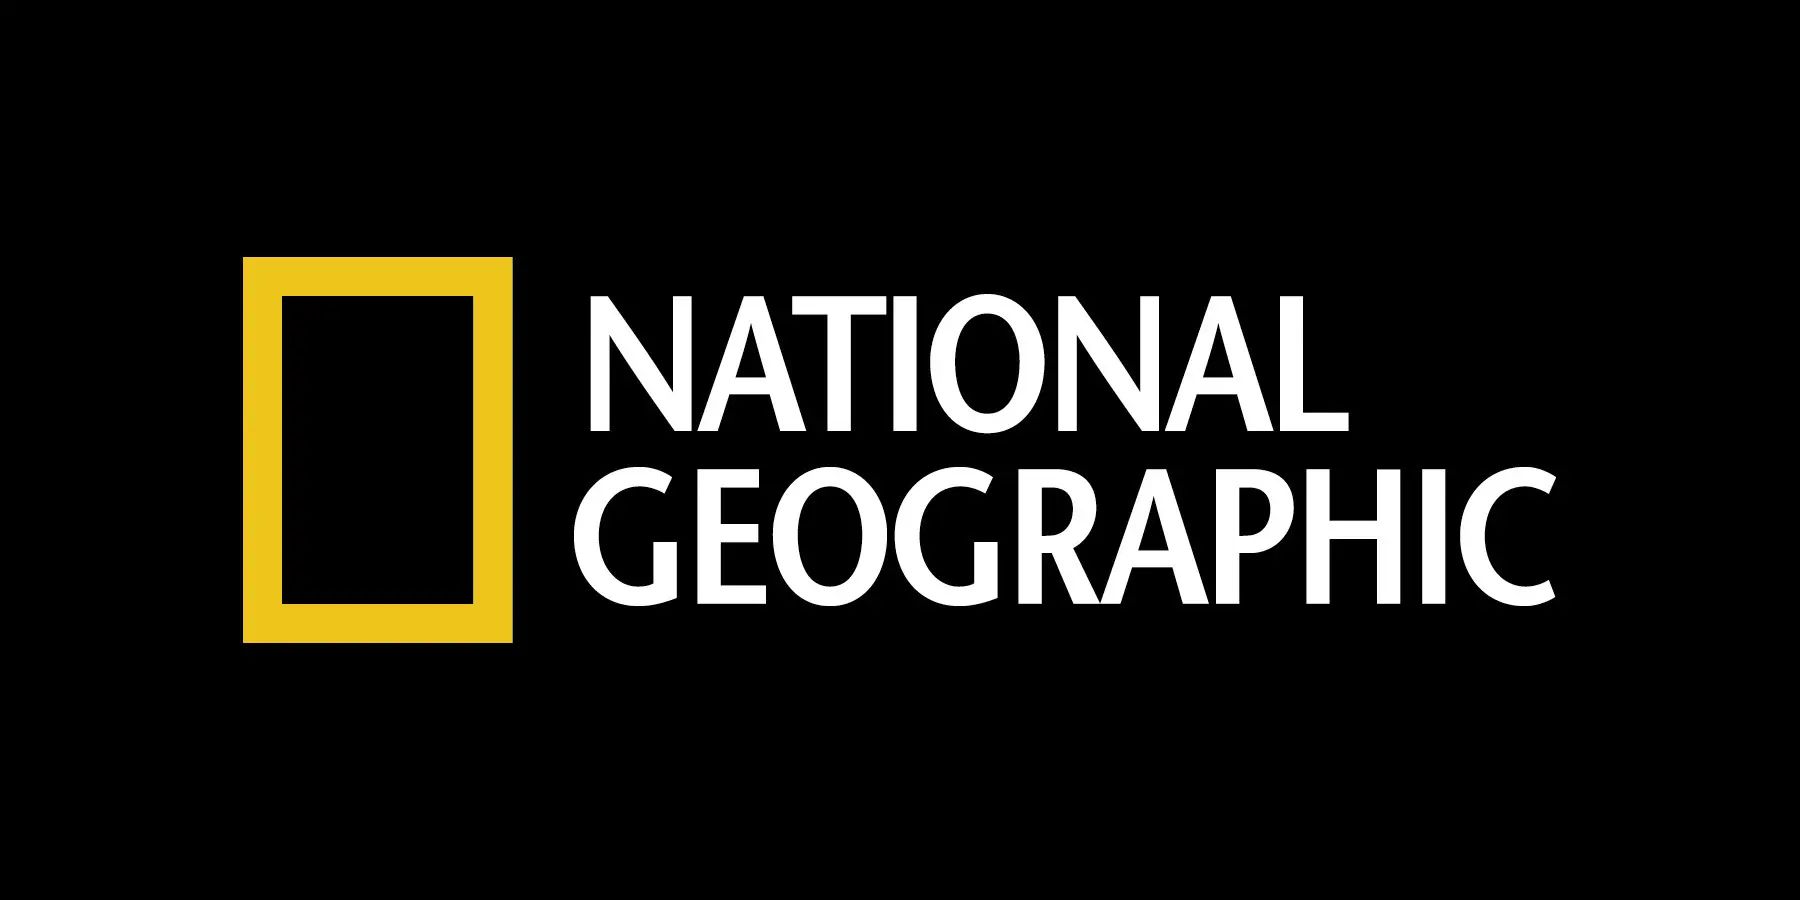 5 Amazing Facts About National Geographic - D23